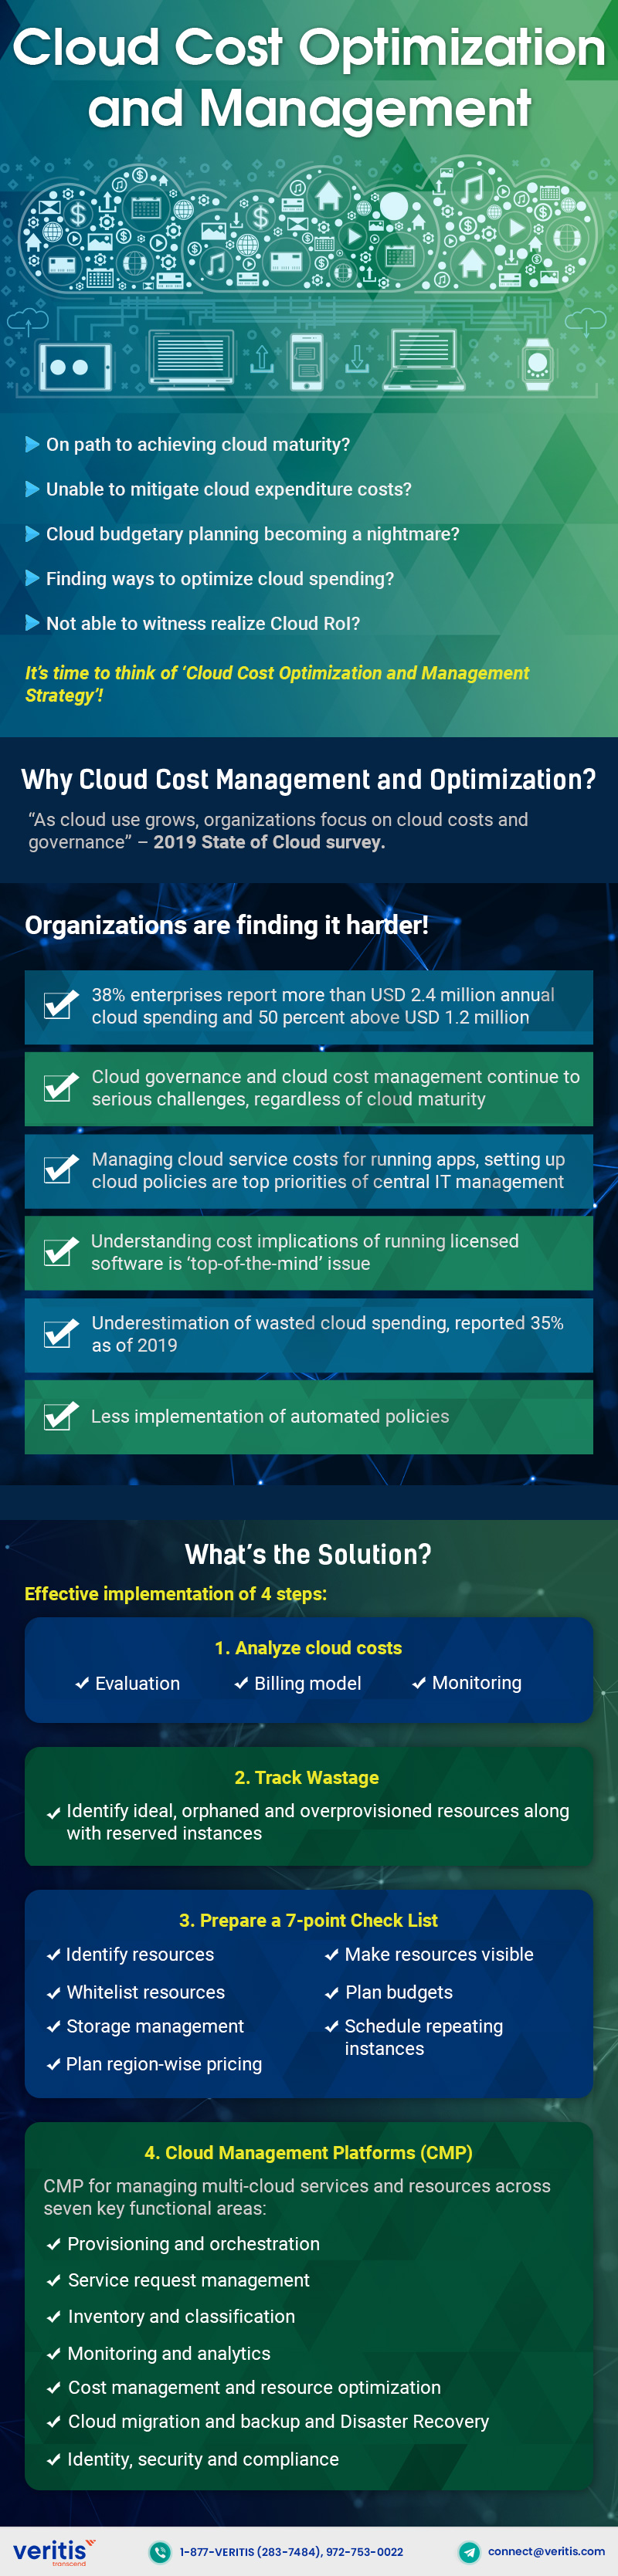 Cloud Cost Optimization and Management IT Infographic